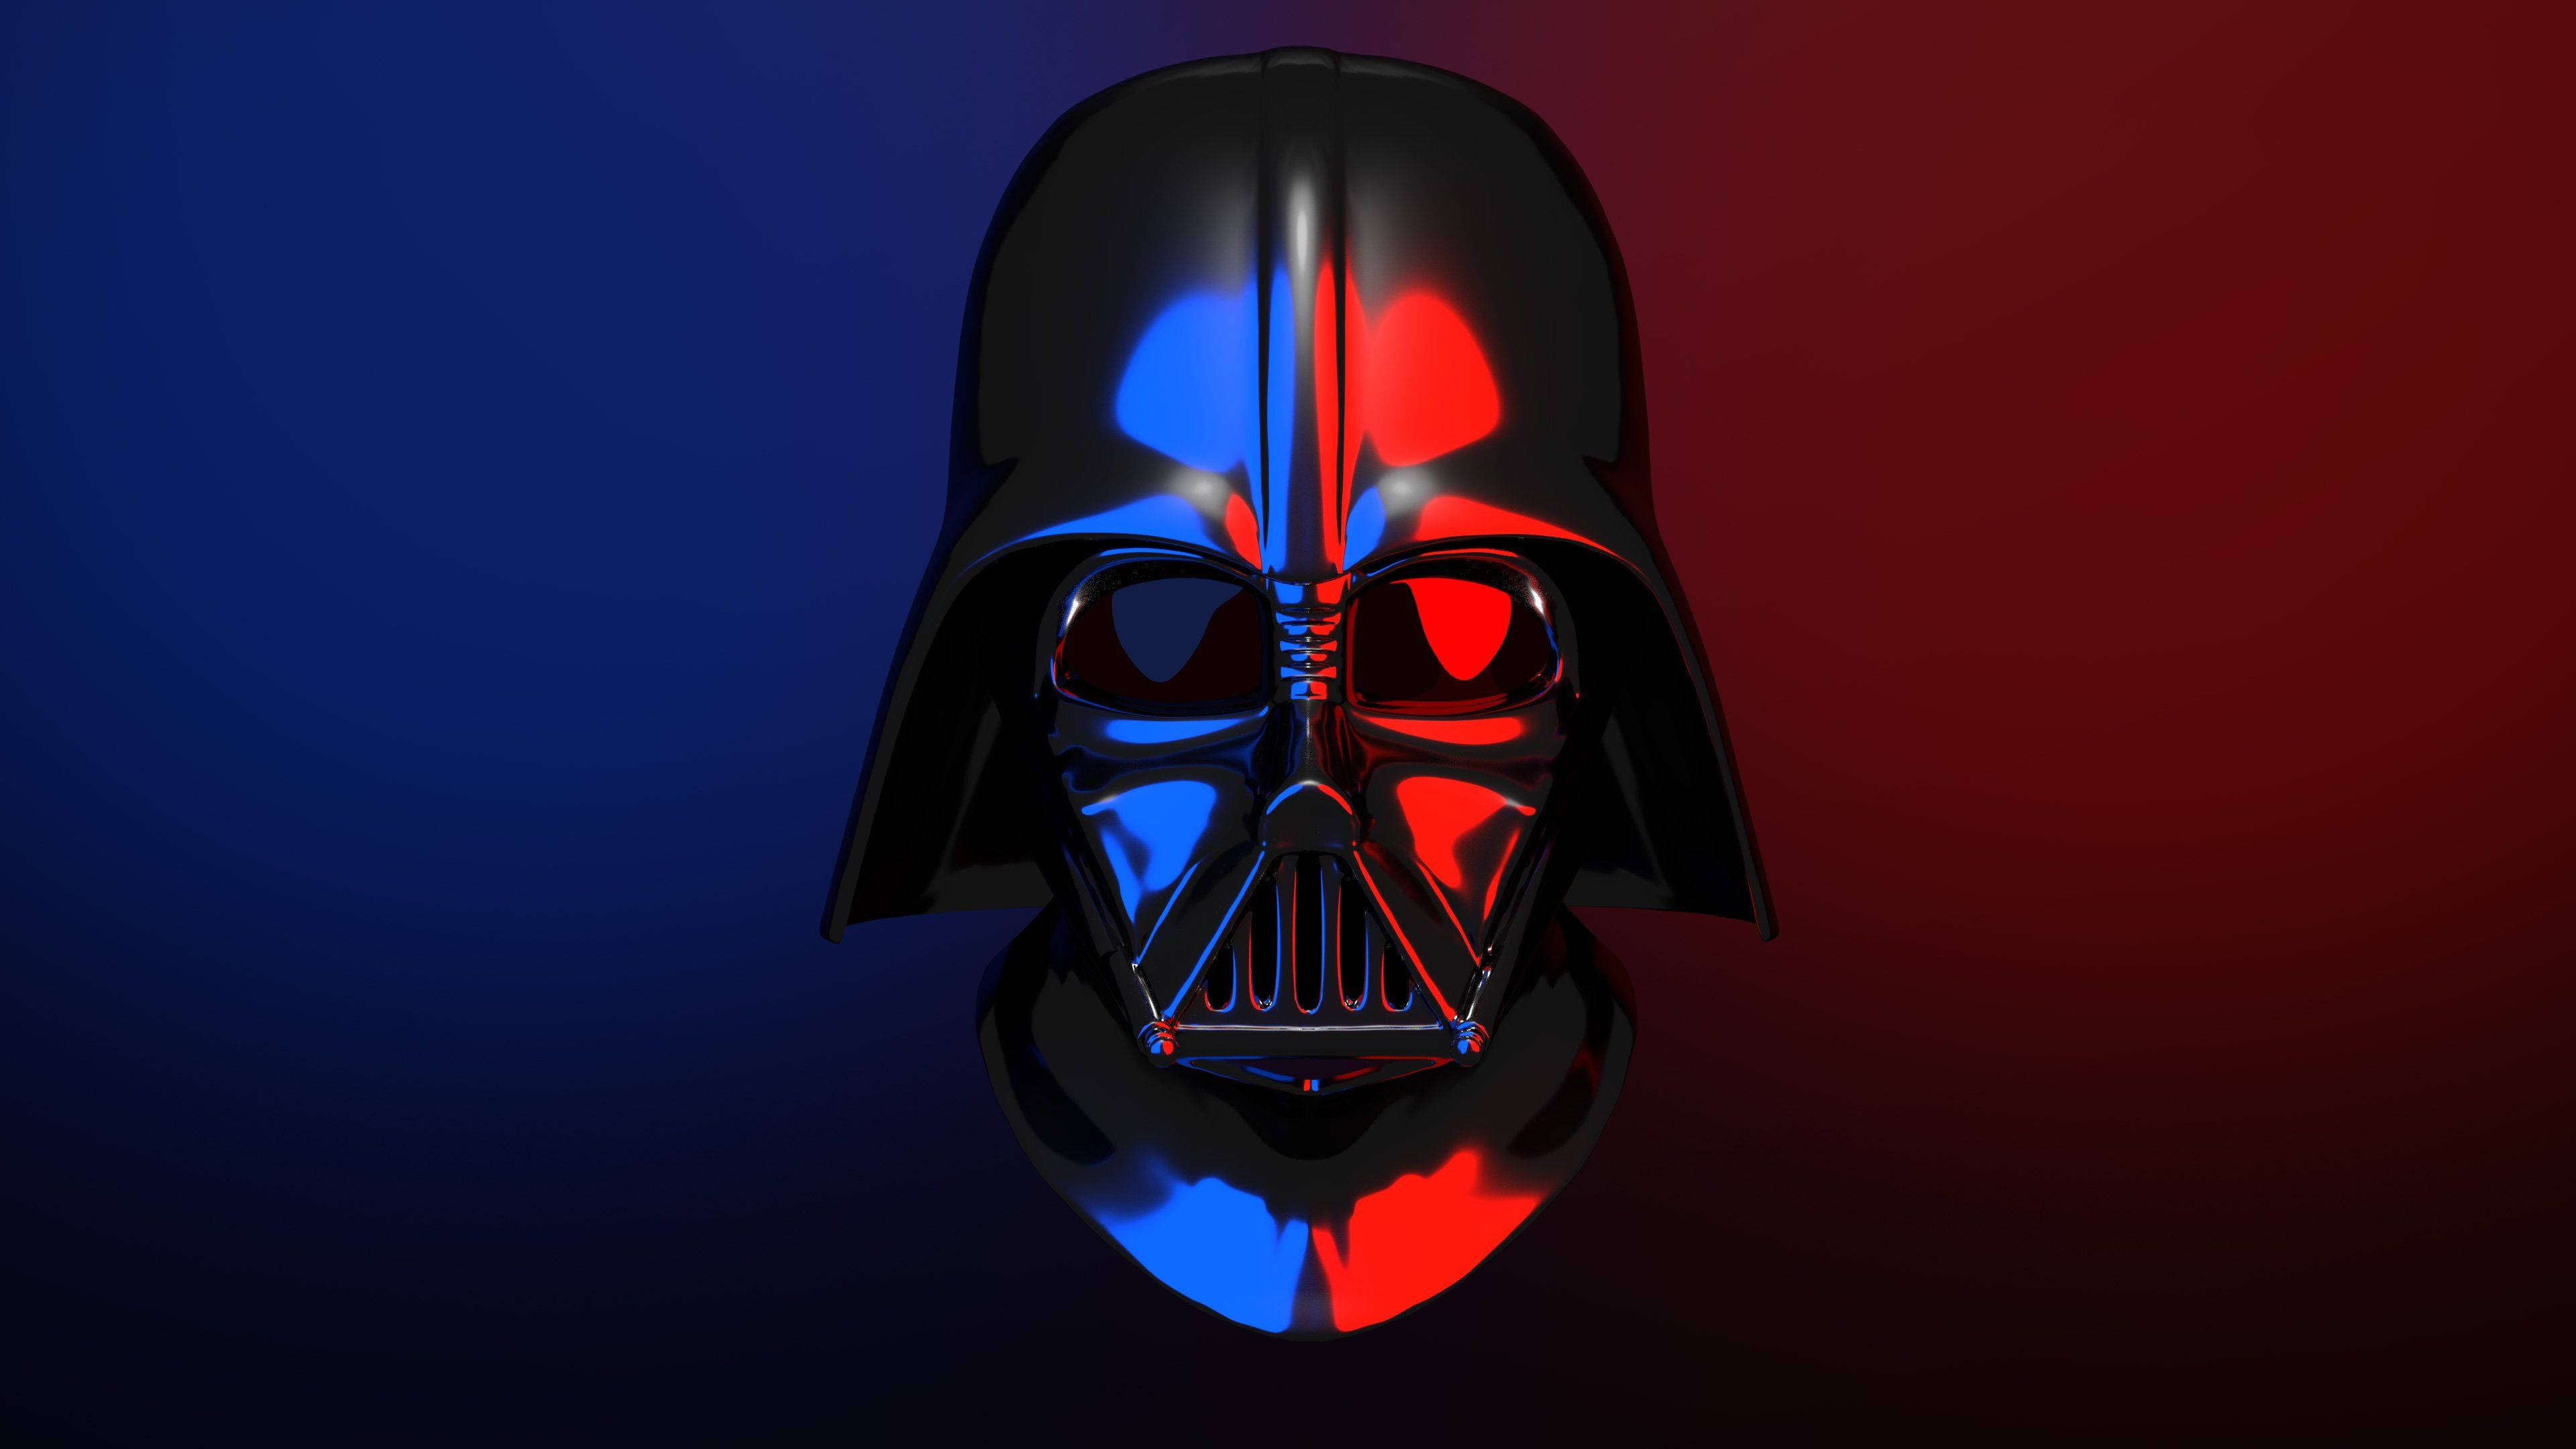 Darth Vader In Blue And Red Background